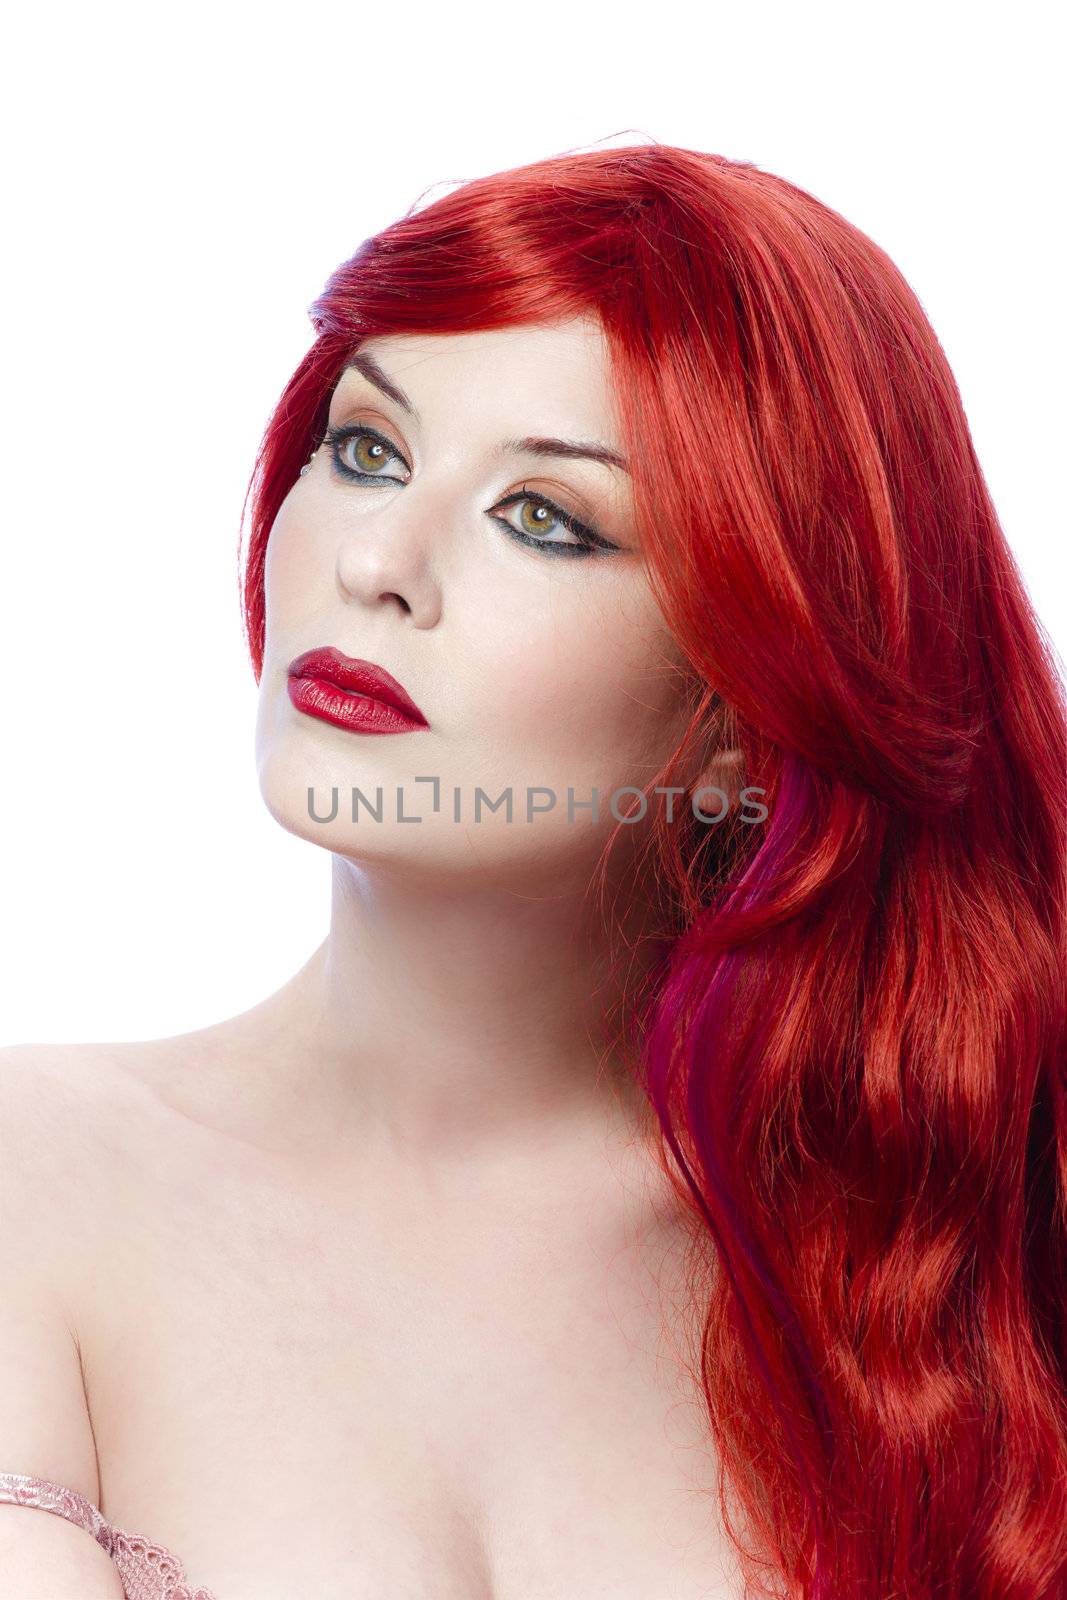 Skincare, Face of a beautiful young woman with redhair by FernandoCortes